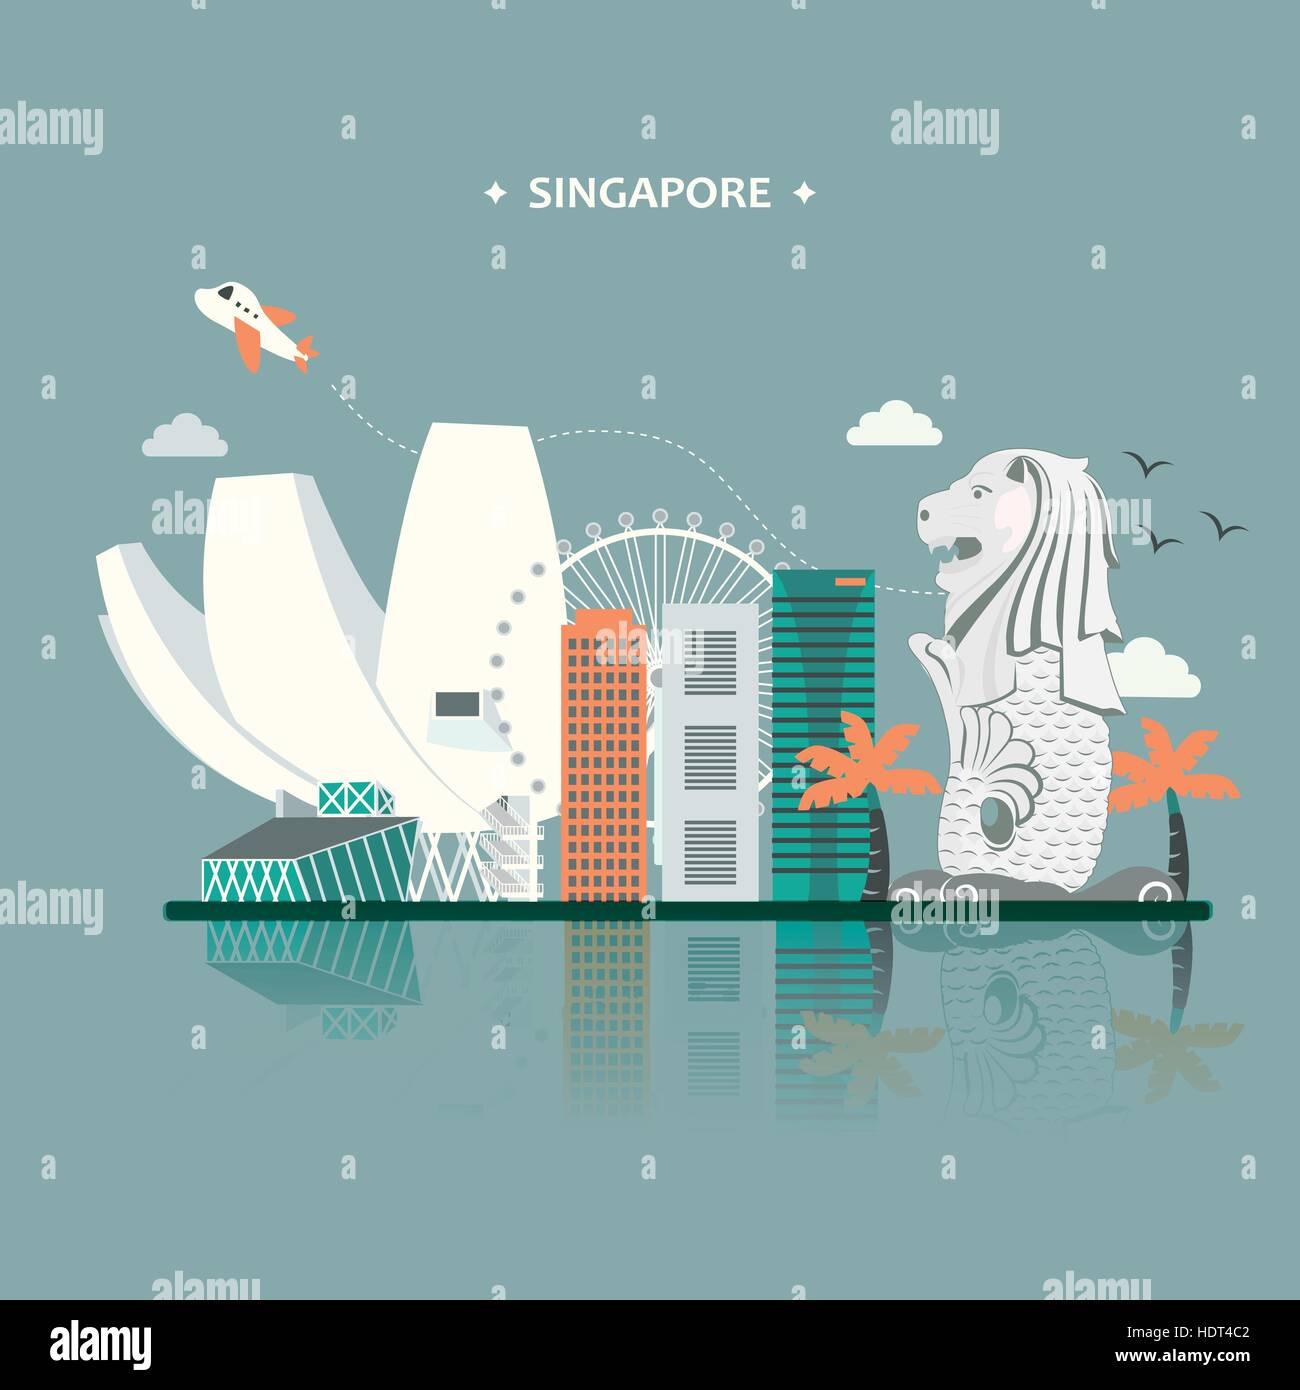 Singapore travel attractions poster design in flat style Stock Vector